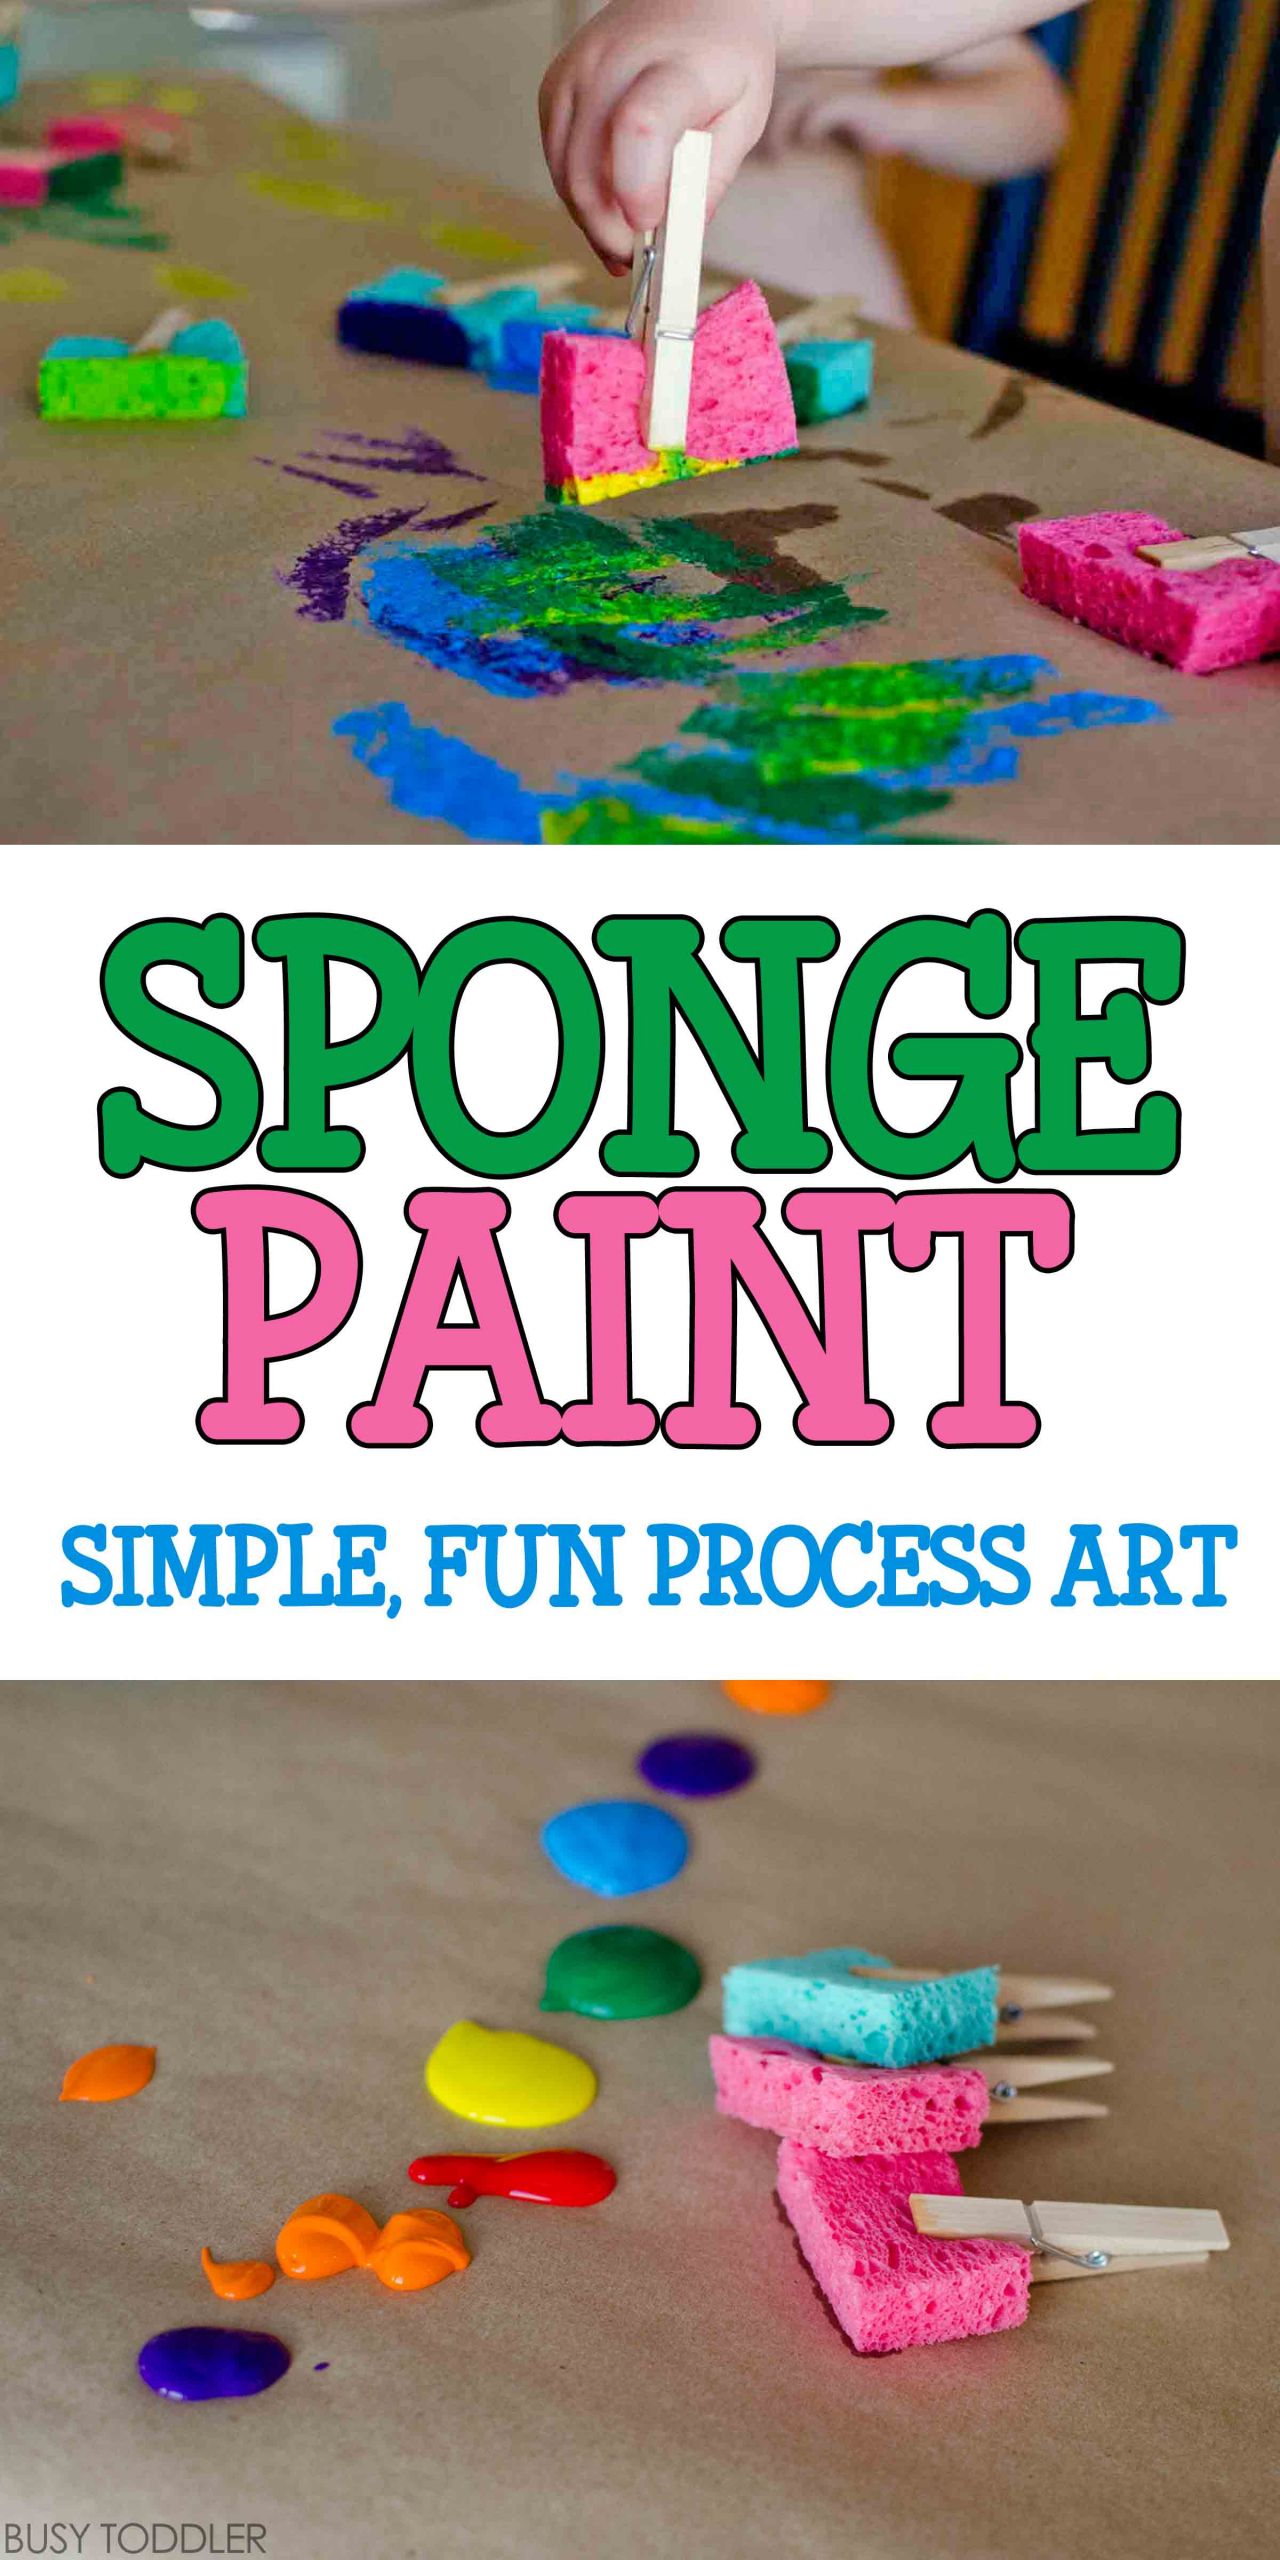 Easy Art Projects Preschoolers
 Sponge Painting Process Art Busy Toddler